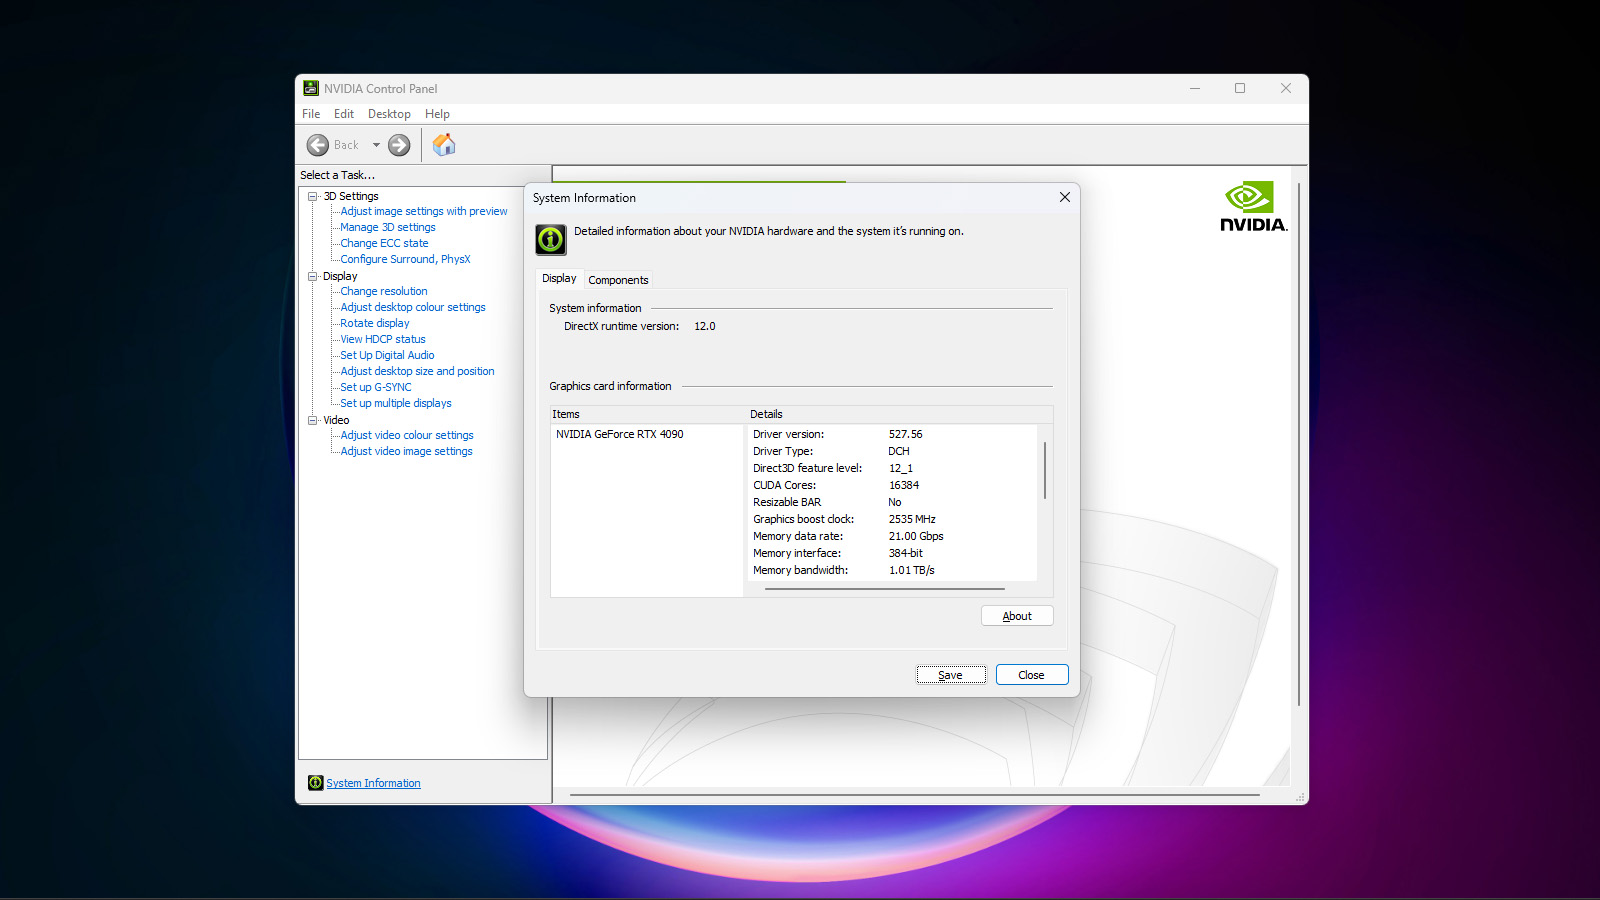 Open the Nvidia Control Panel.
Click on "Help" and select "System Information."